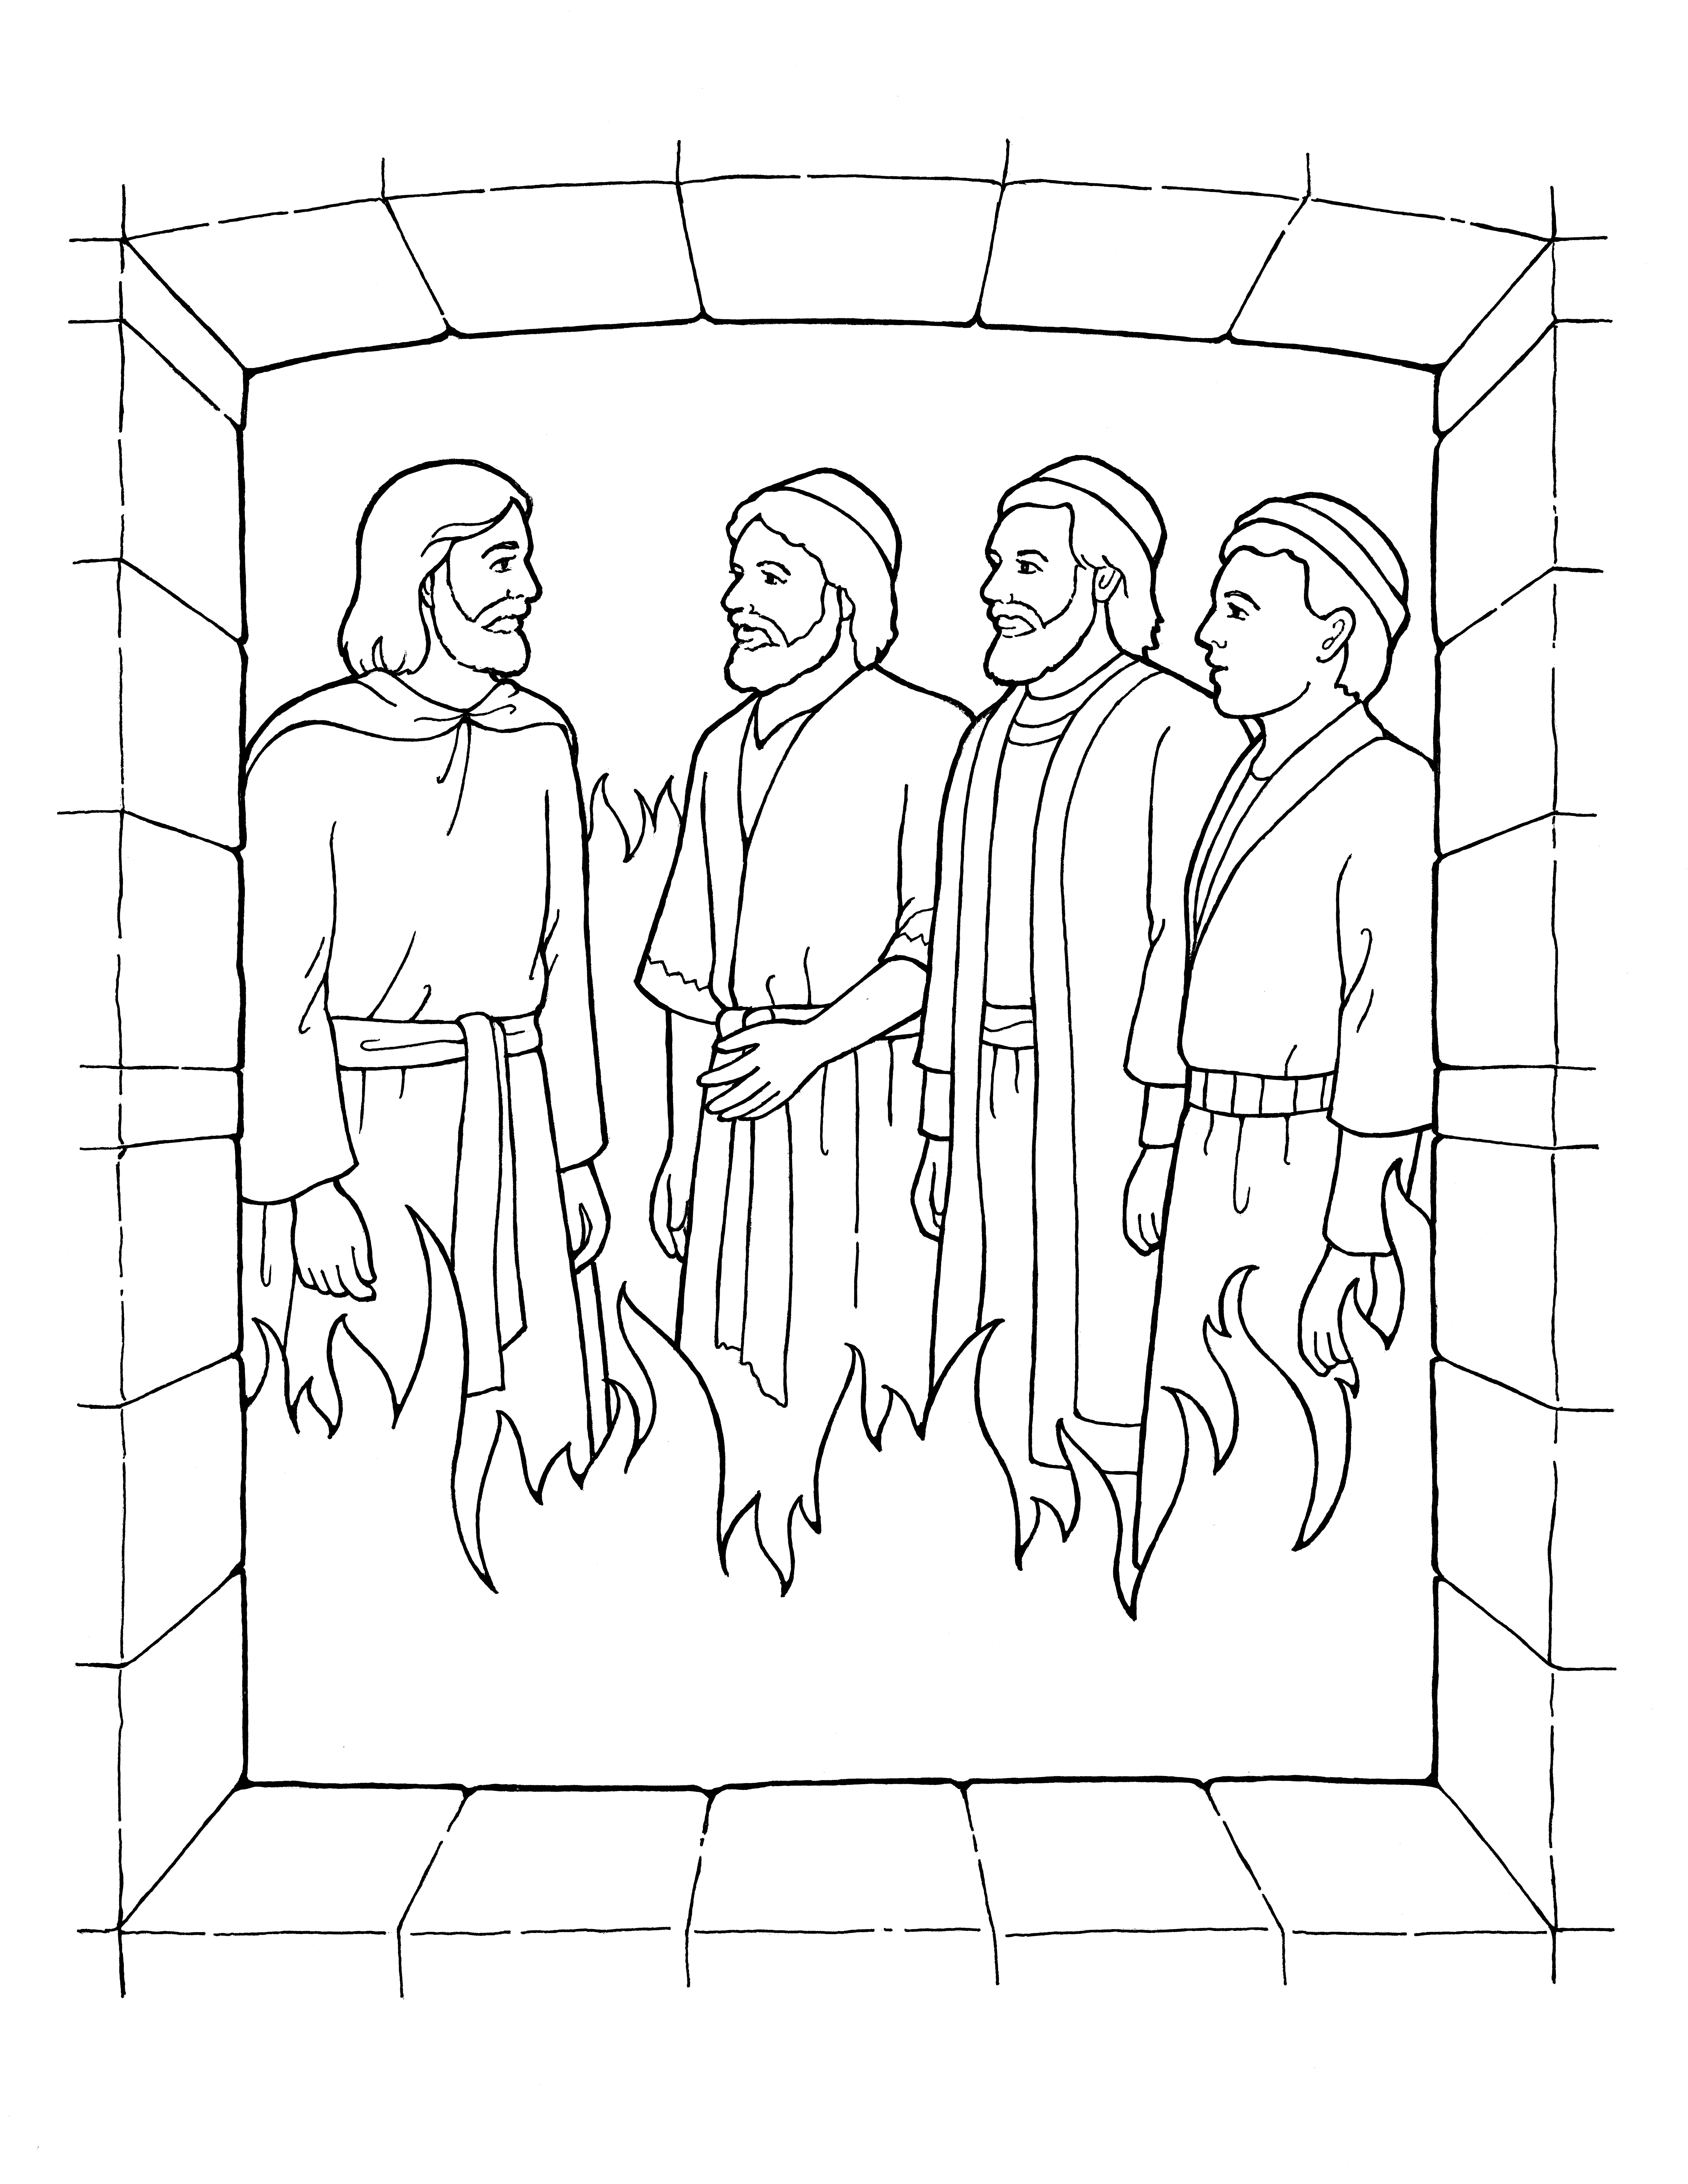 An illustration of Christ with Shadrach, Meshach, and Abednego in a fiery furnace.